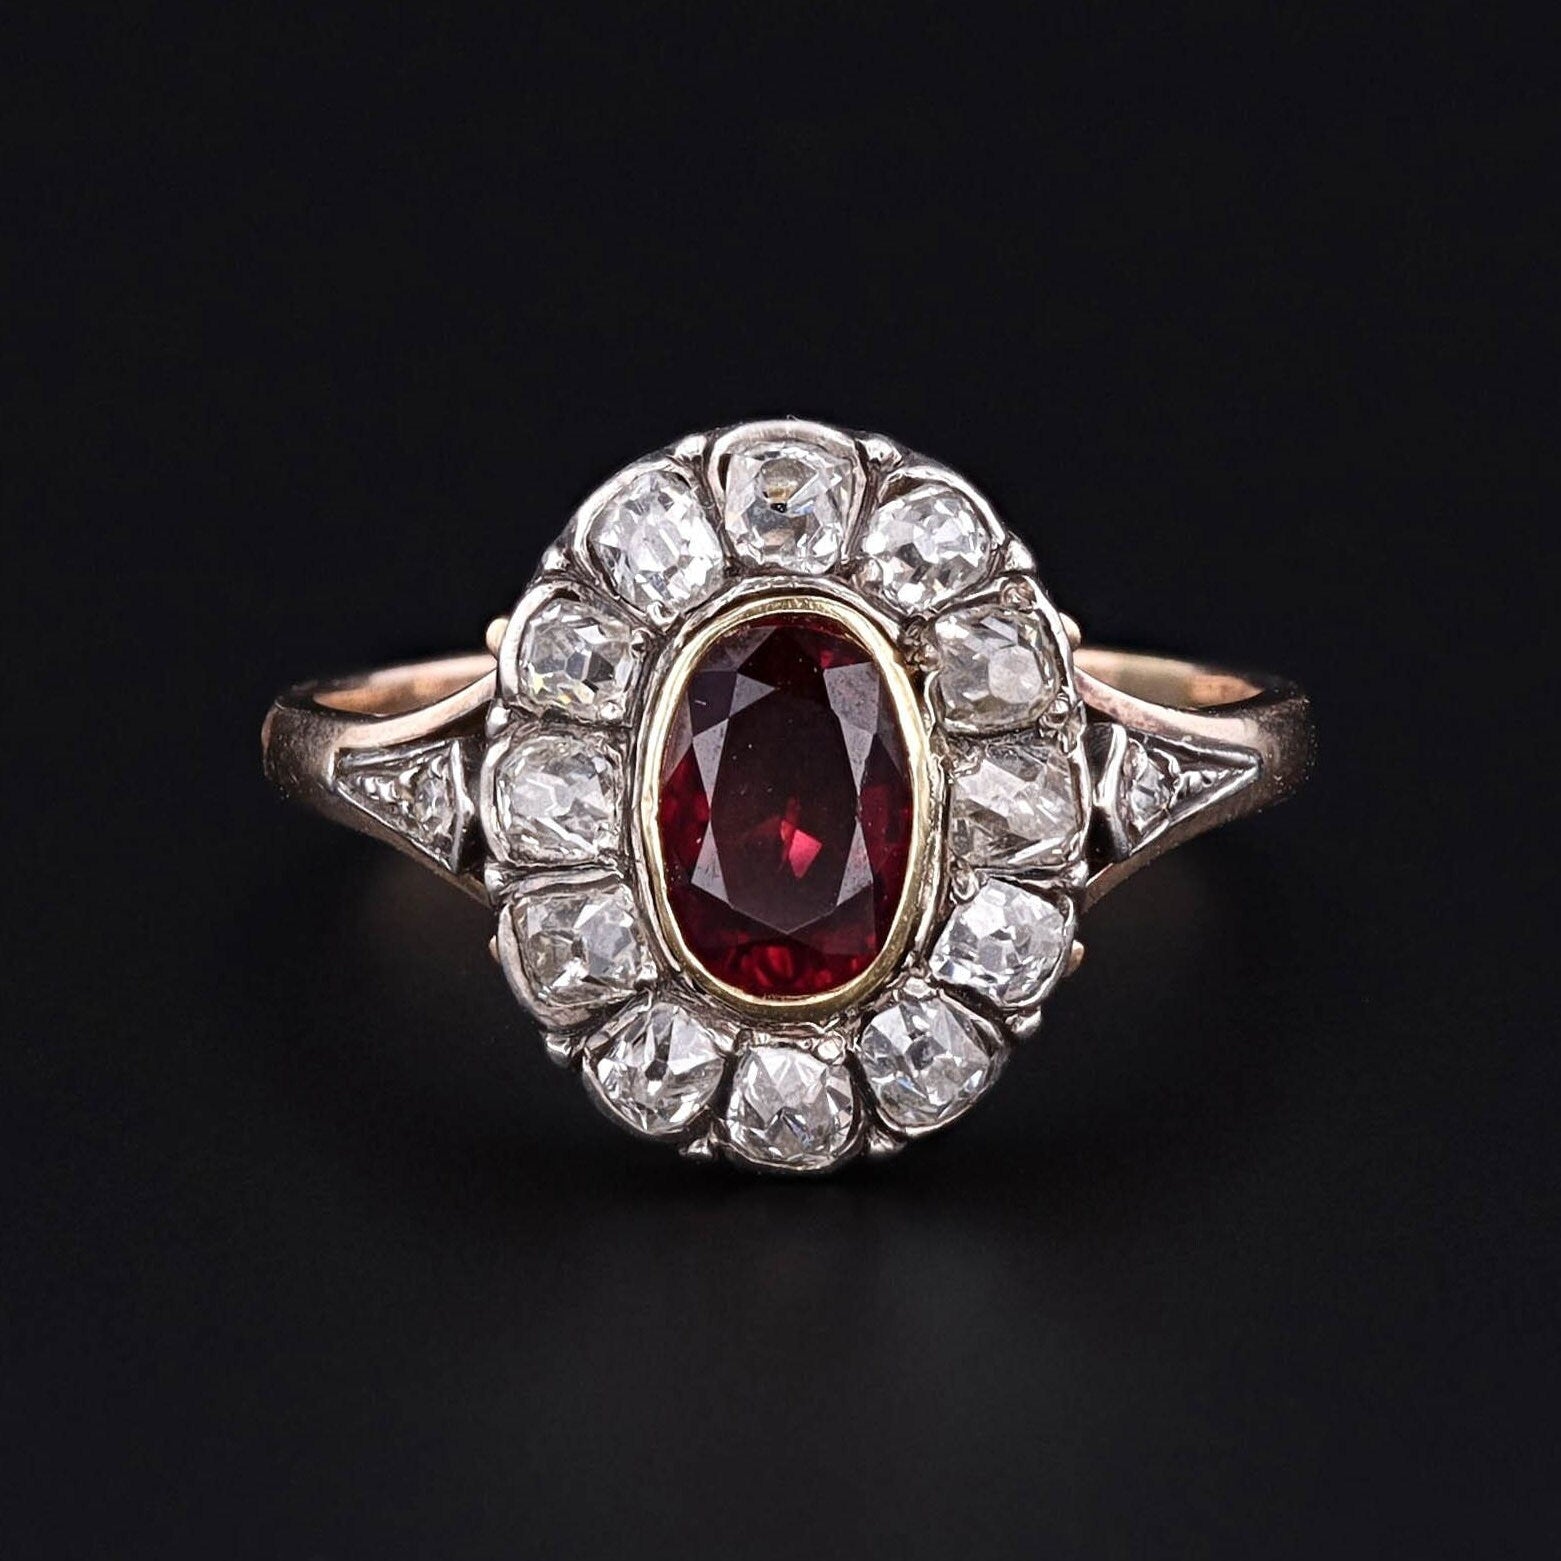 Antique Ruby and Diamond Ring | Silver Topped 14k Gold Ring 